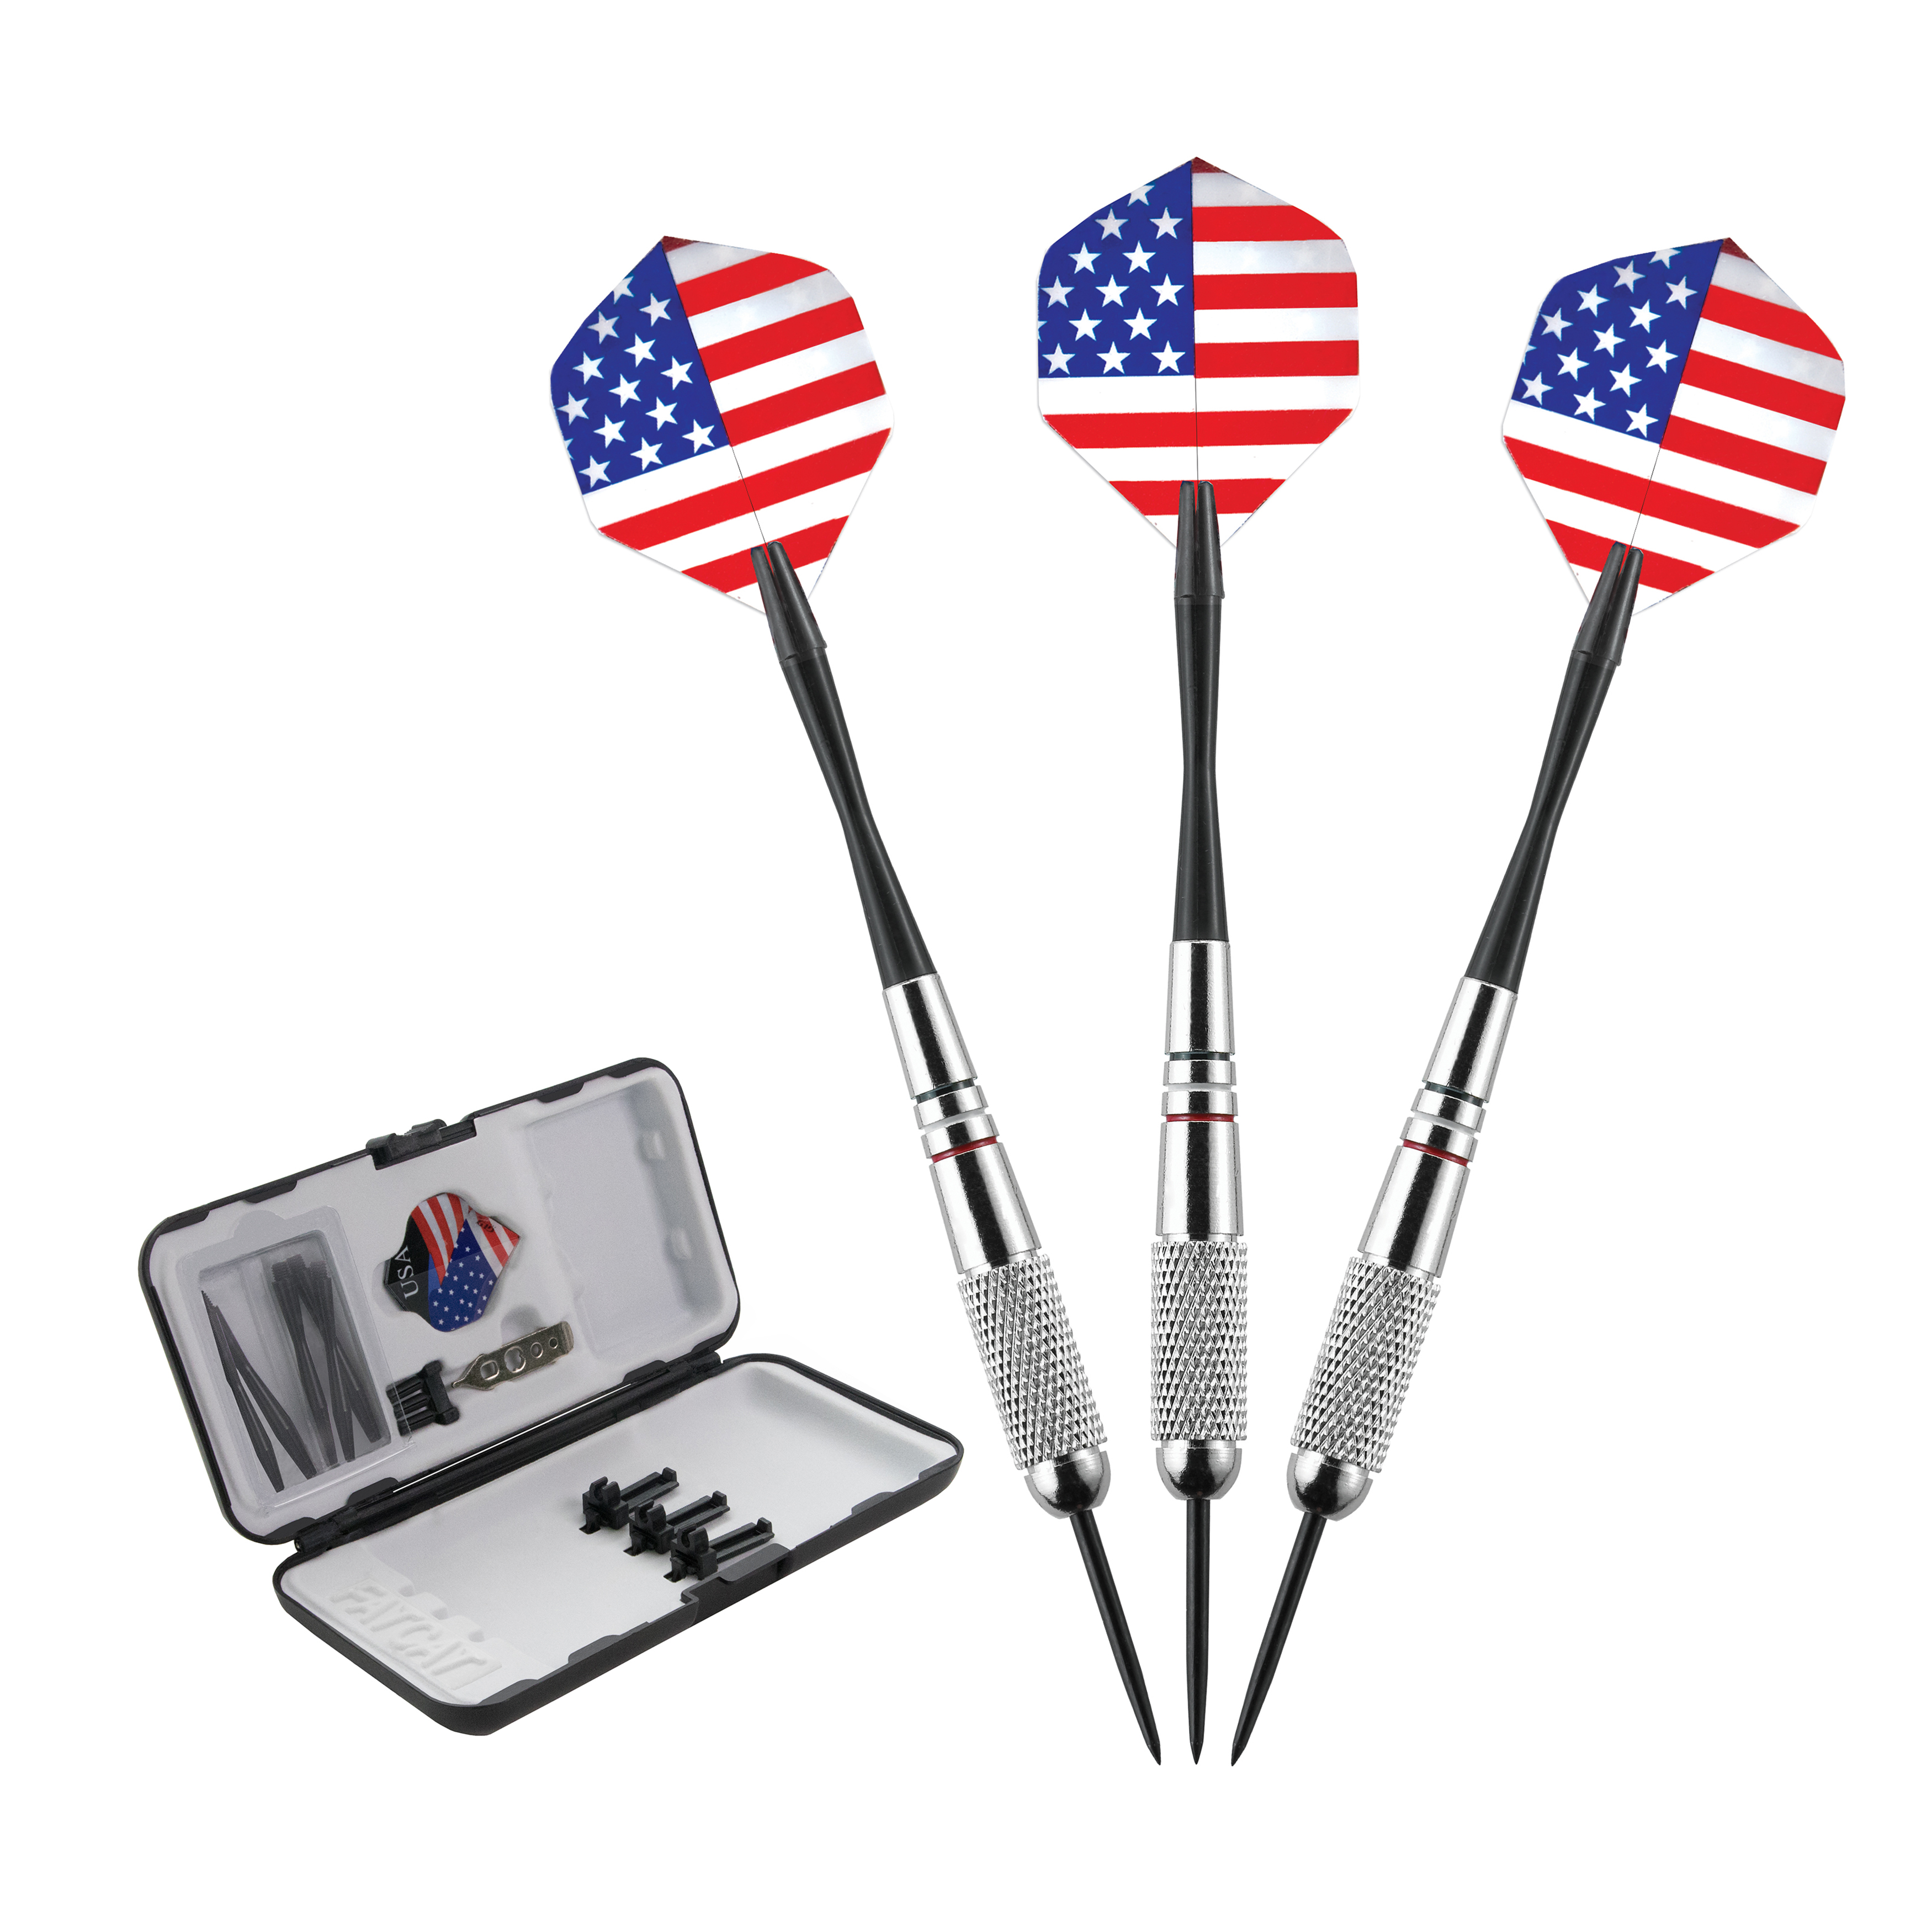 Support Our Troops Dart Set 23 Grams